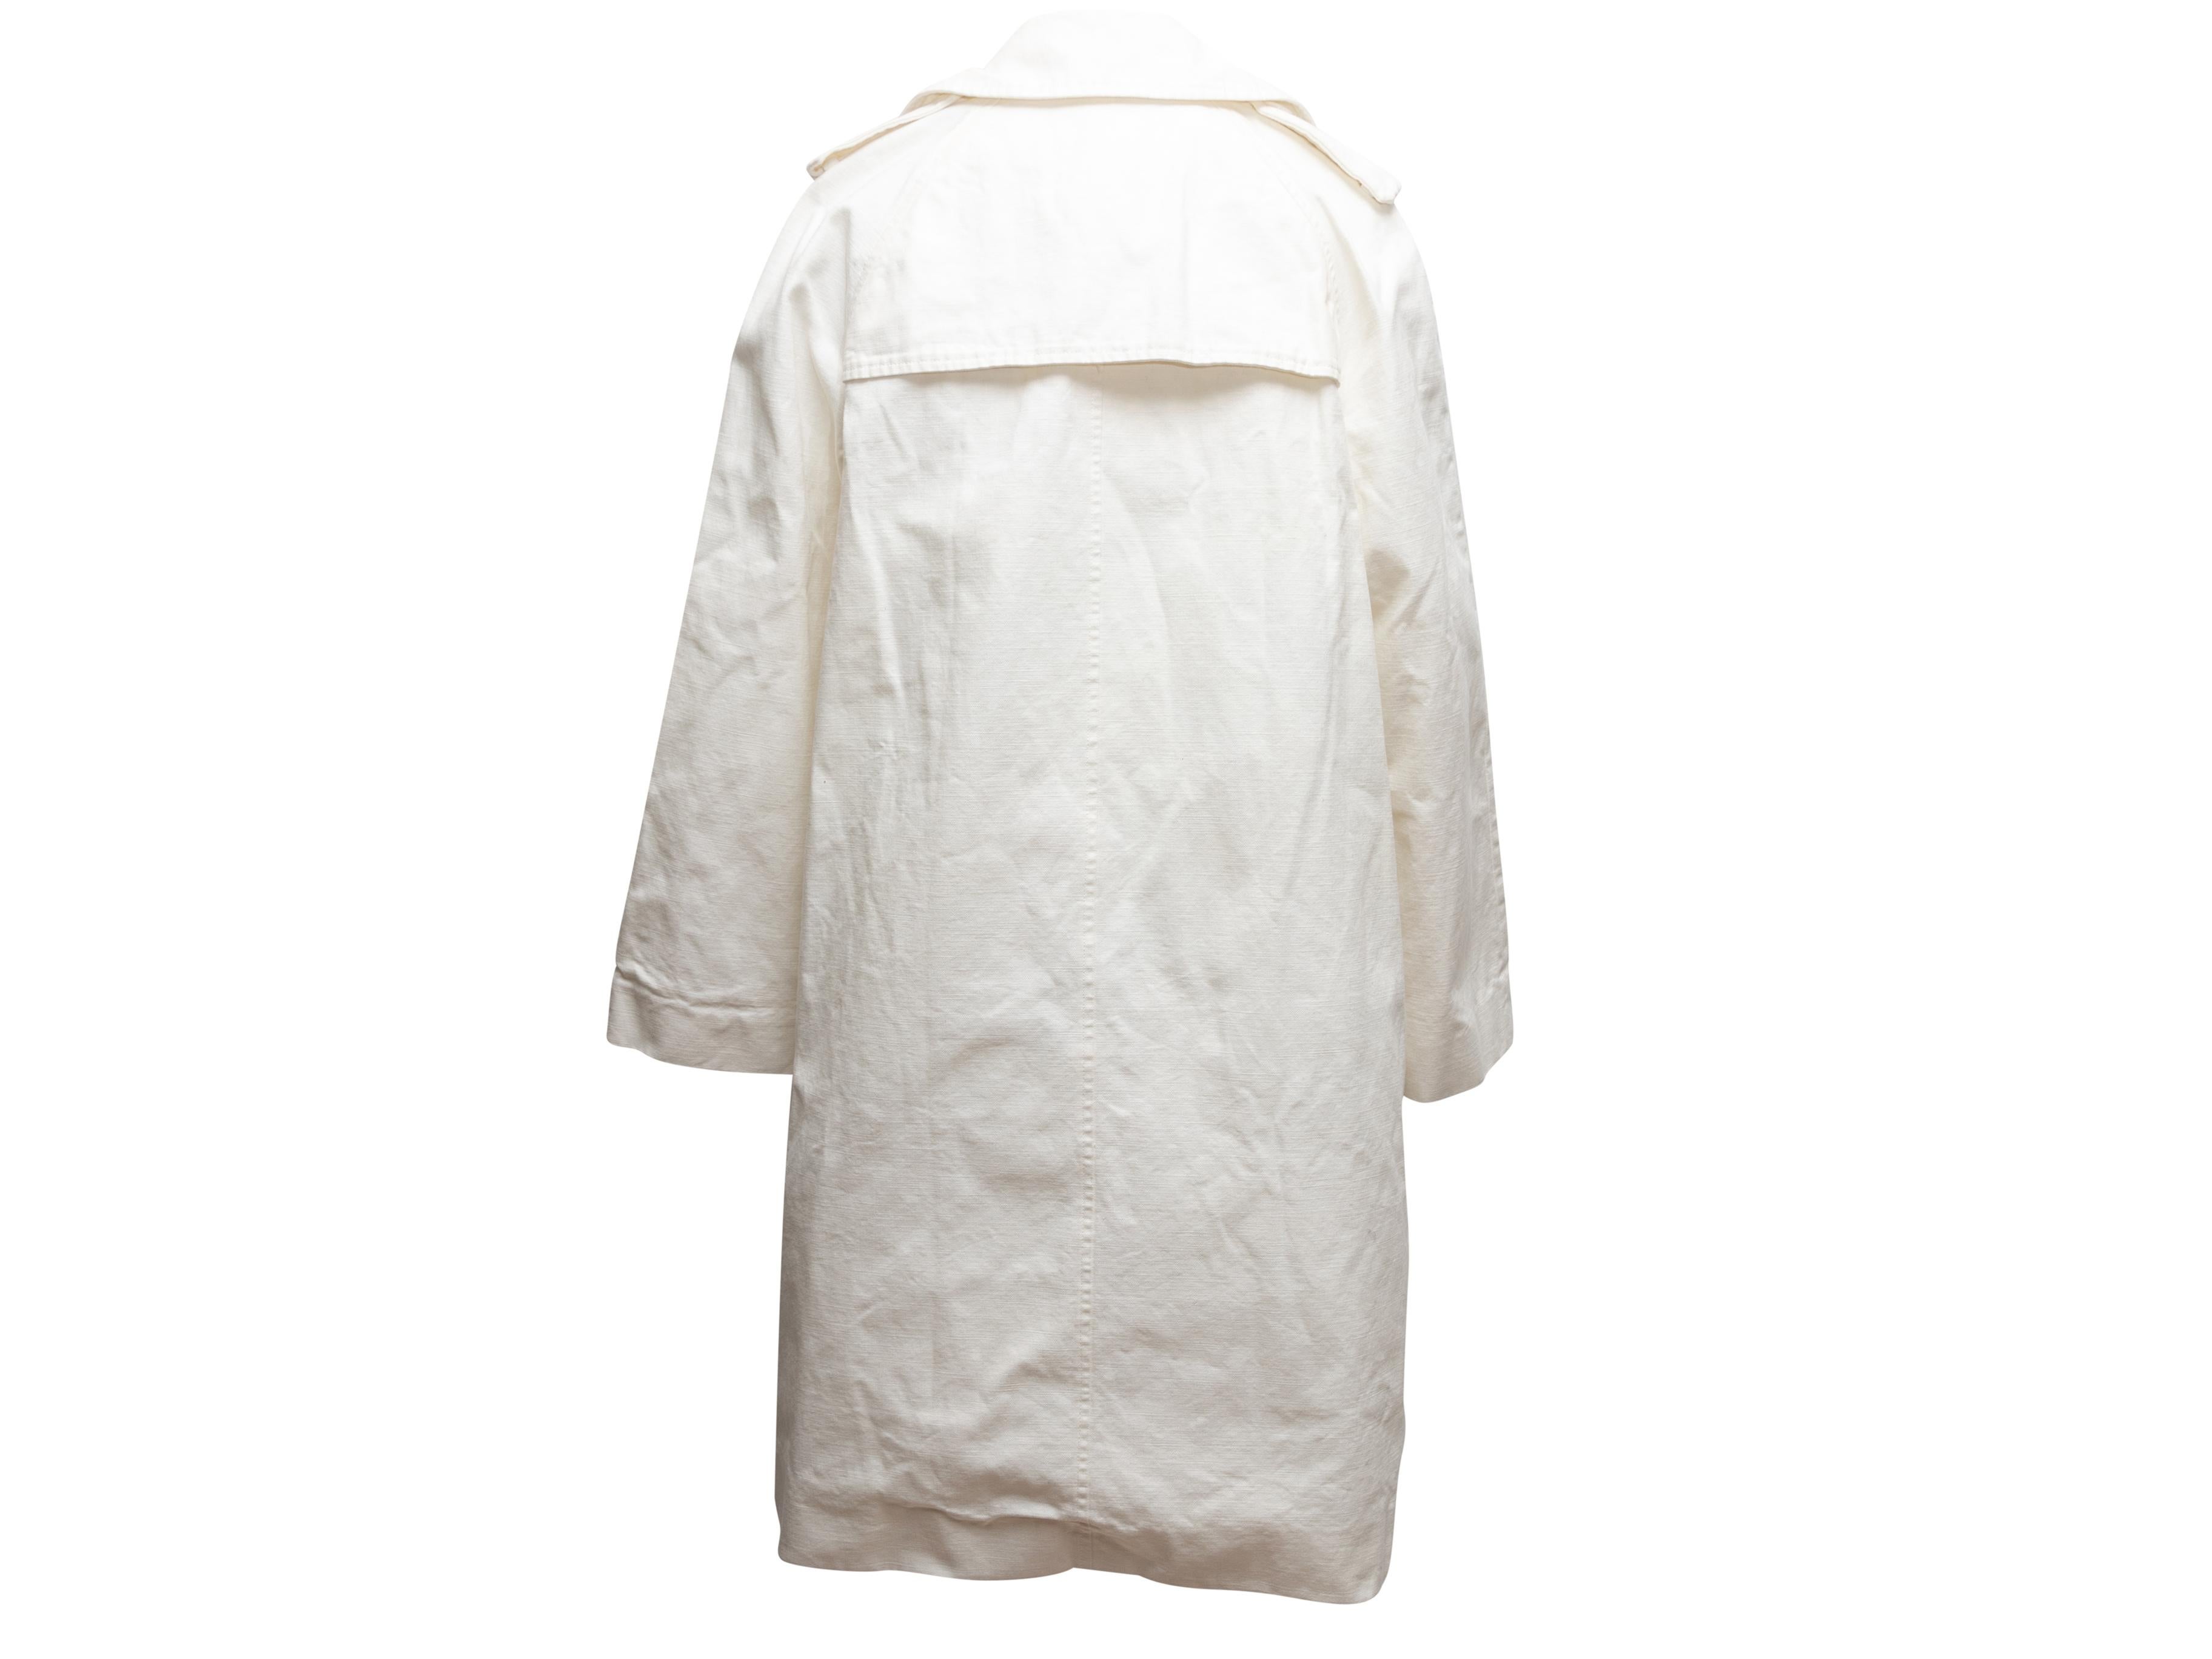 D&G Trench-coat blanc, taille IT 44 2